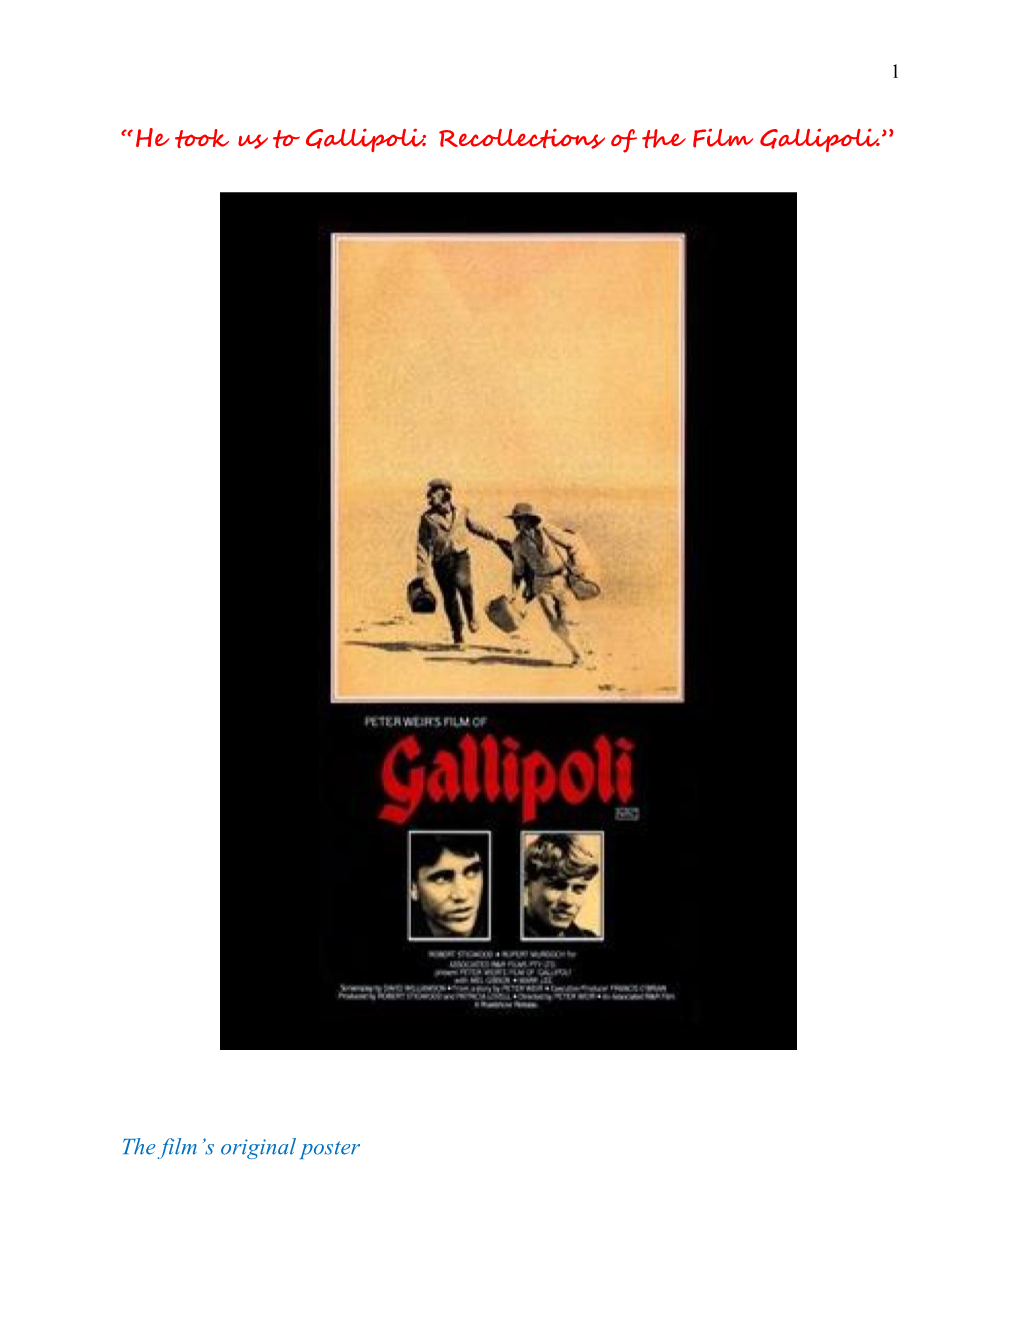 He Took Us to Gallipoli (Recollection)